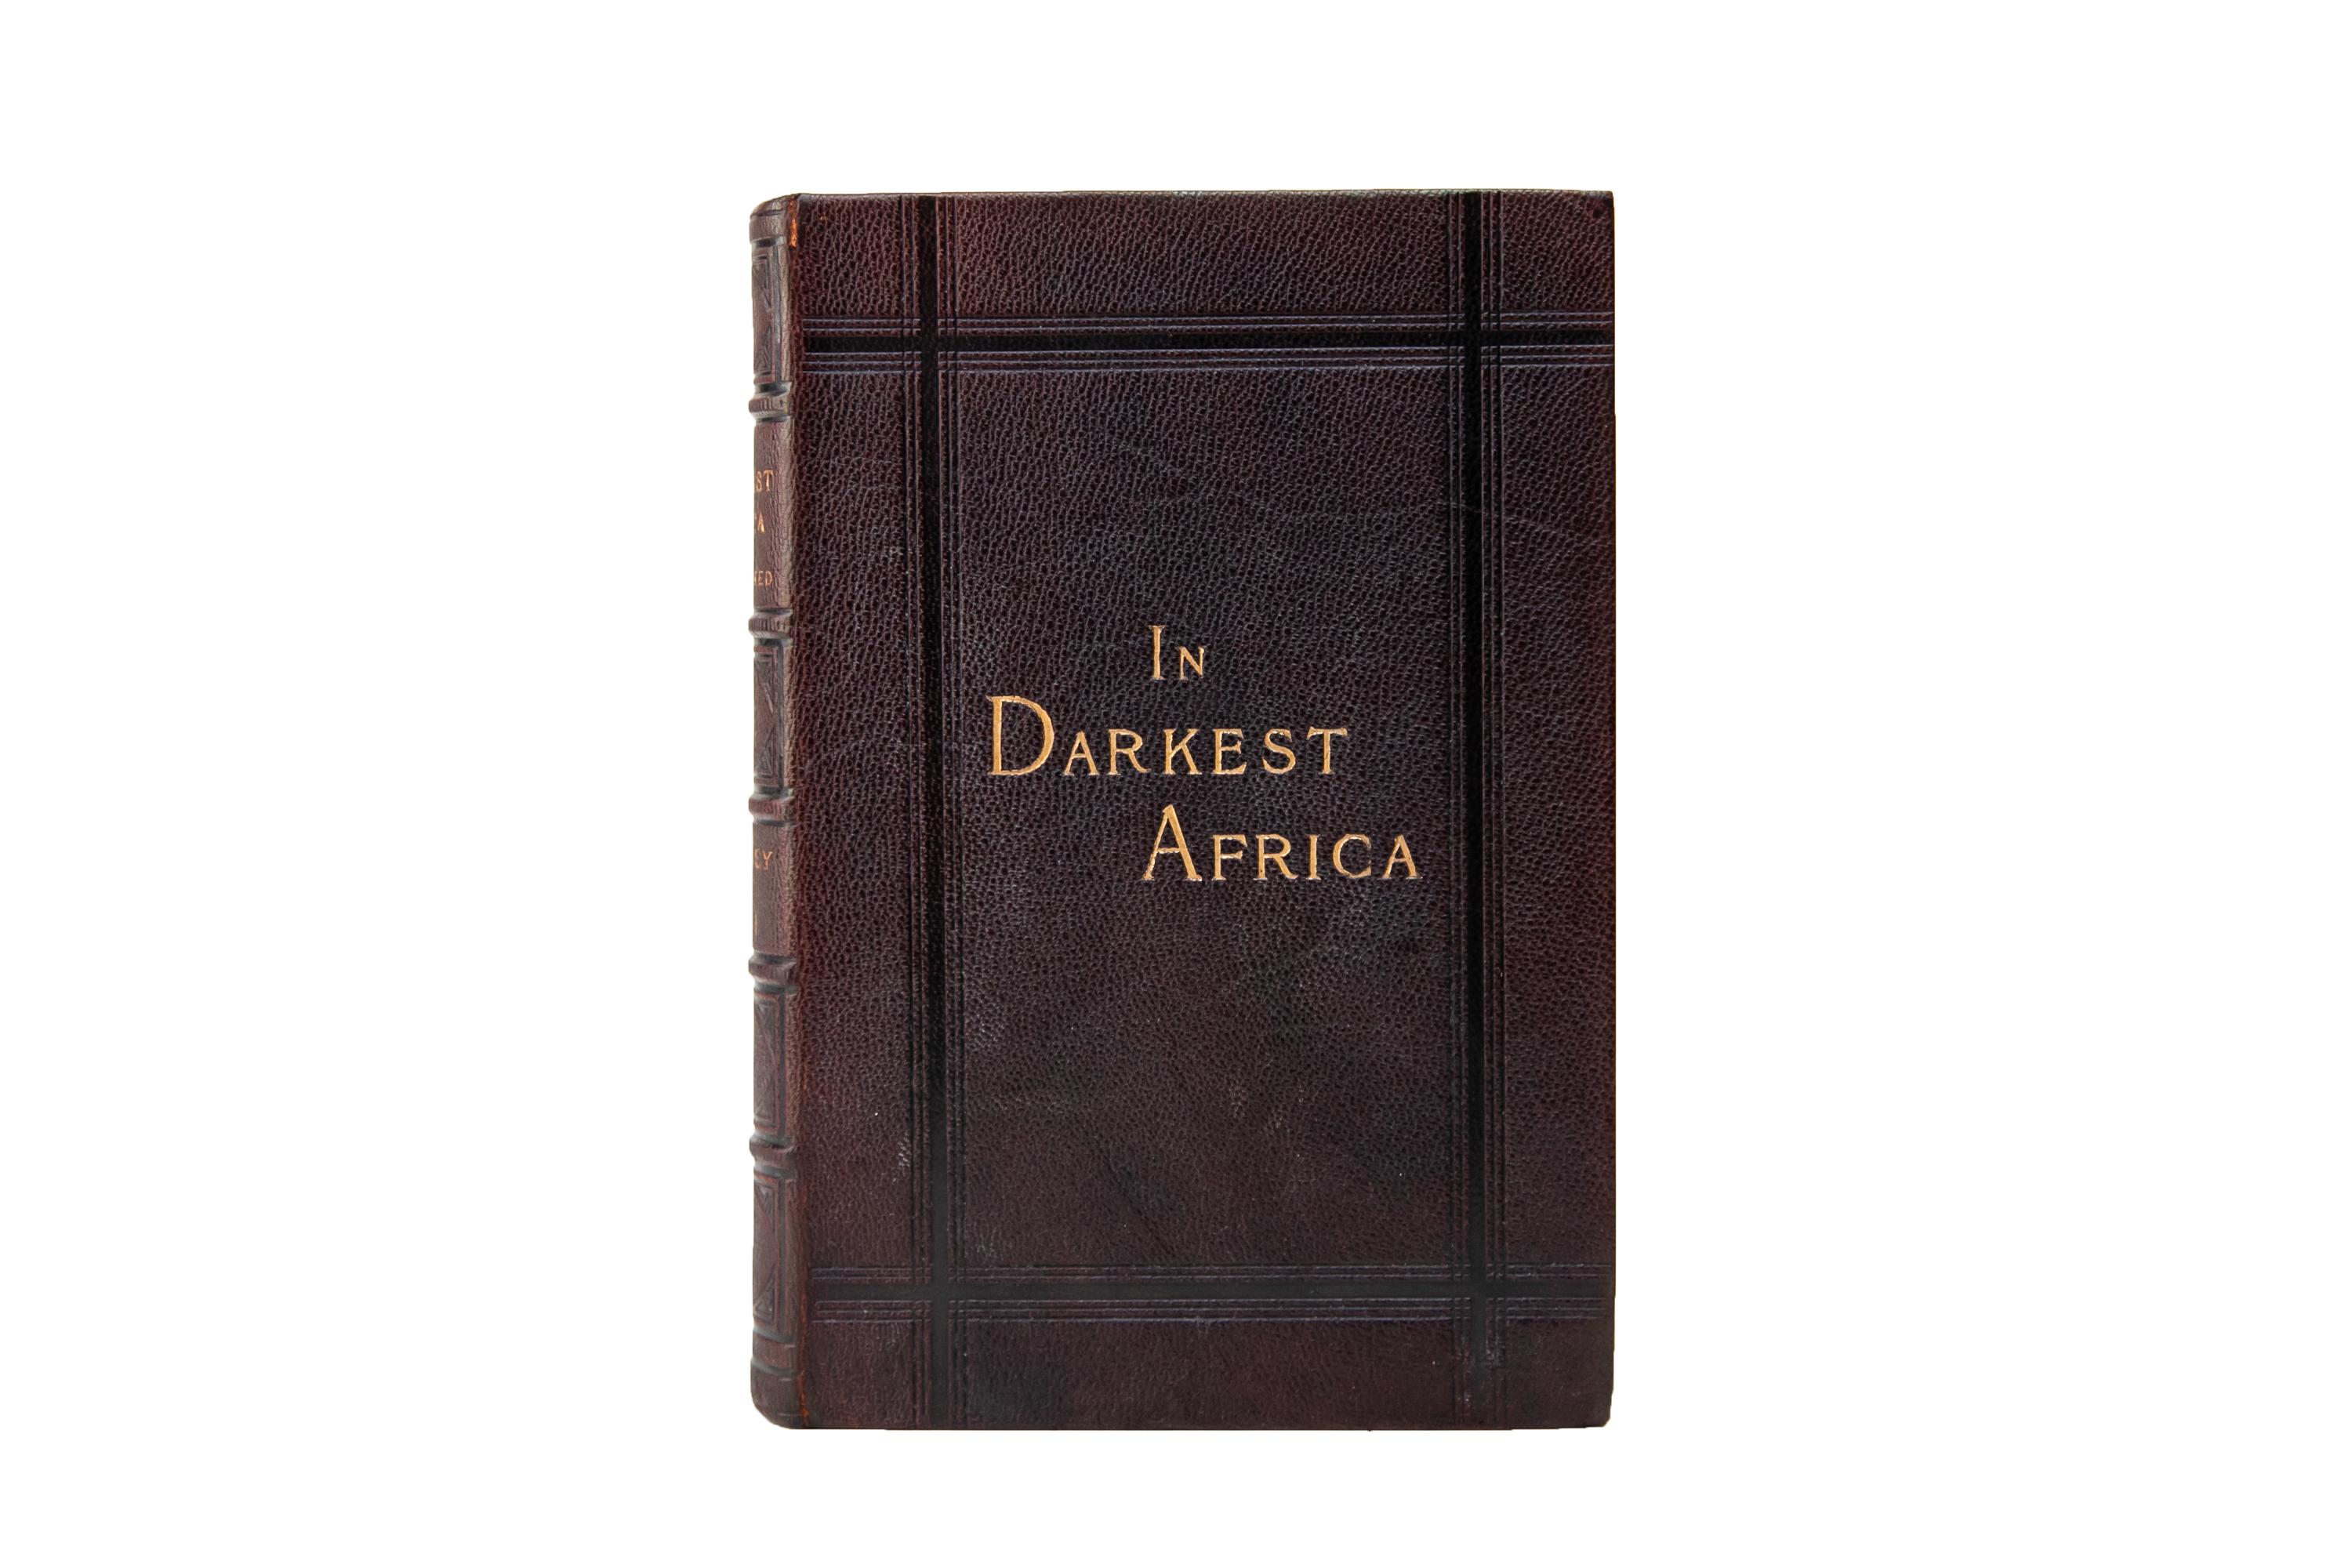 2 Volumes. Henry M. Stanley, In Darkest Africa. Bound in full brown morocco with the covers displaying open-tooled borders and gilt-tooled label lettering. The spines display raised bands, open-tooled panel details, and gilt-tooled label lettering.